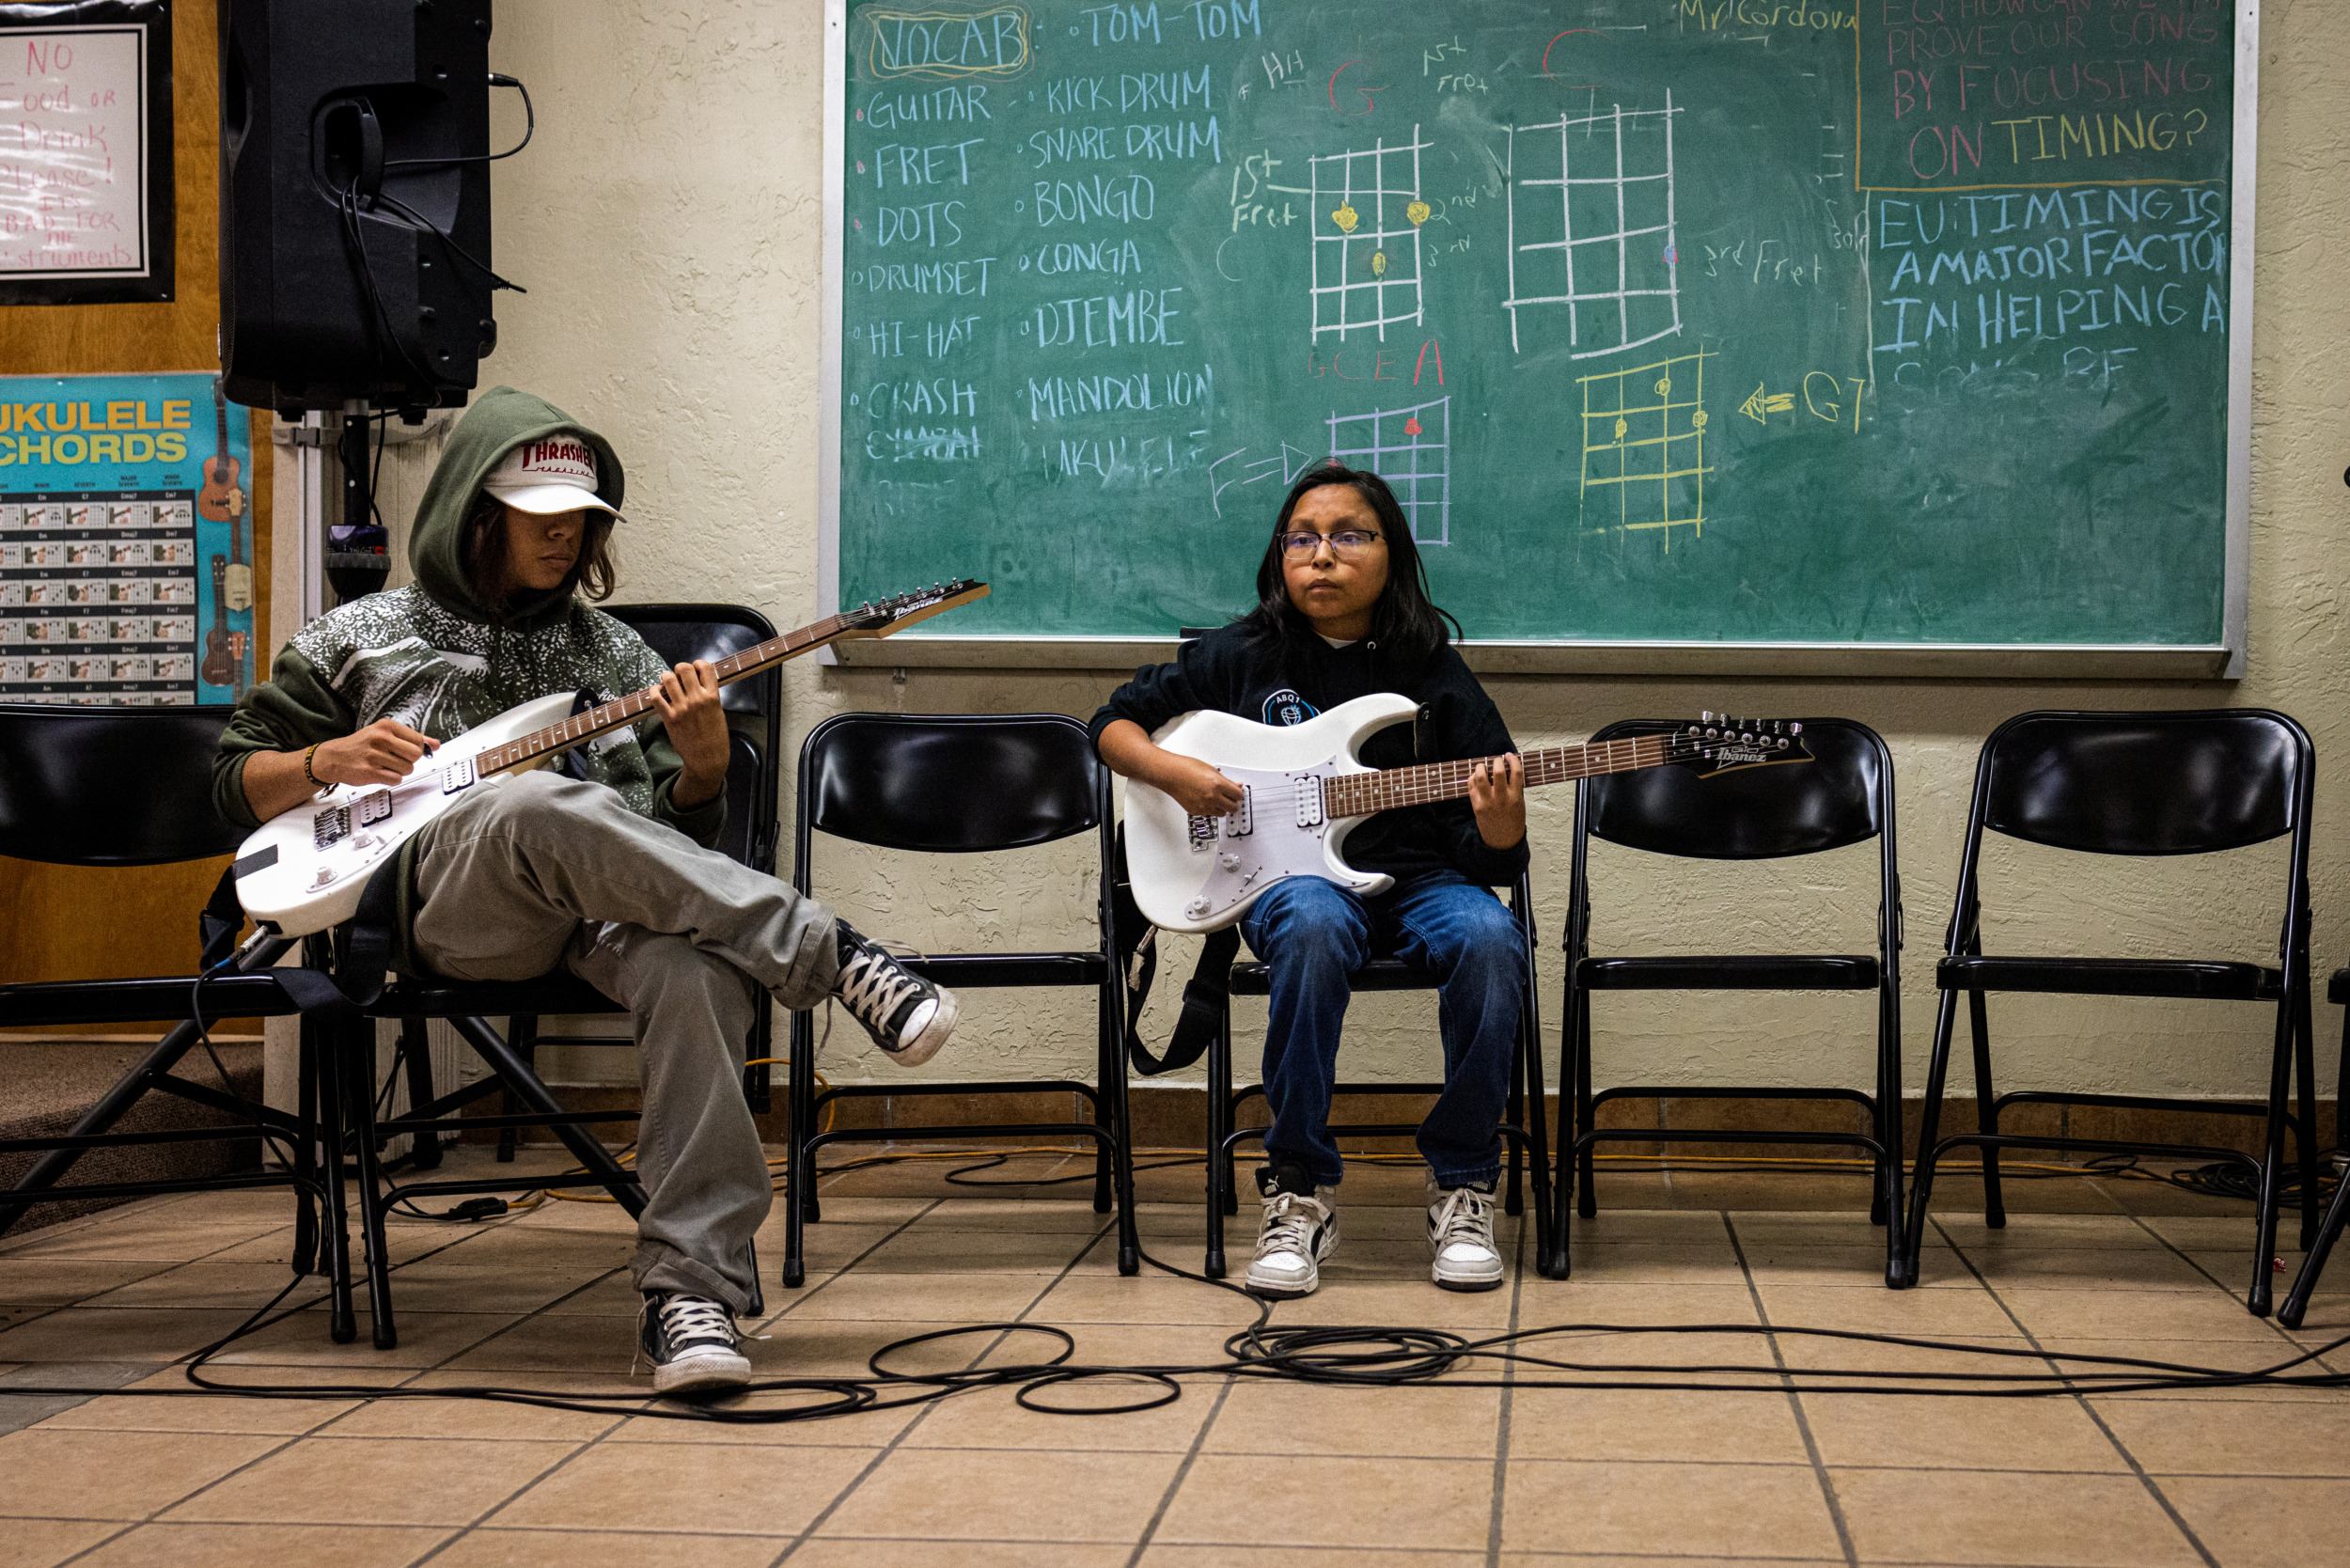 Native American Charter School; Two male teens with dark hair sit in front of a chalkboard and plat guitars